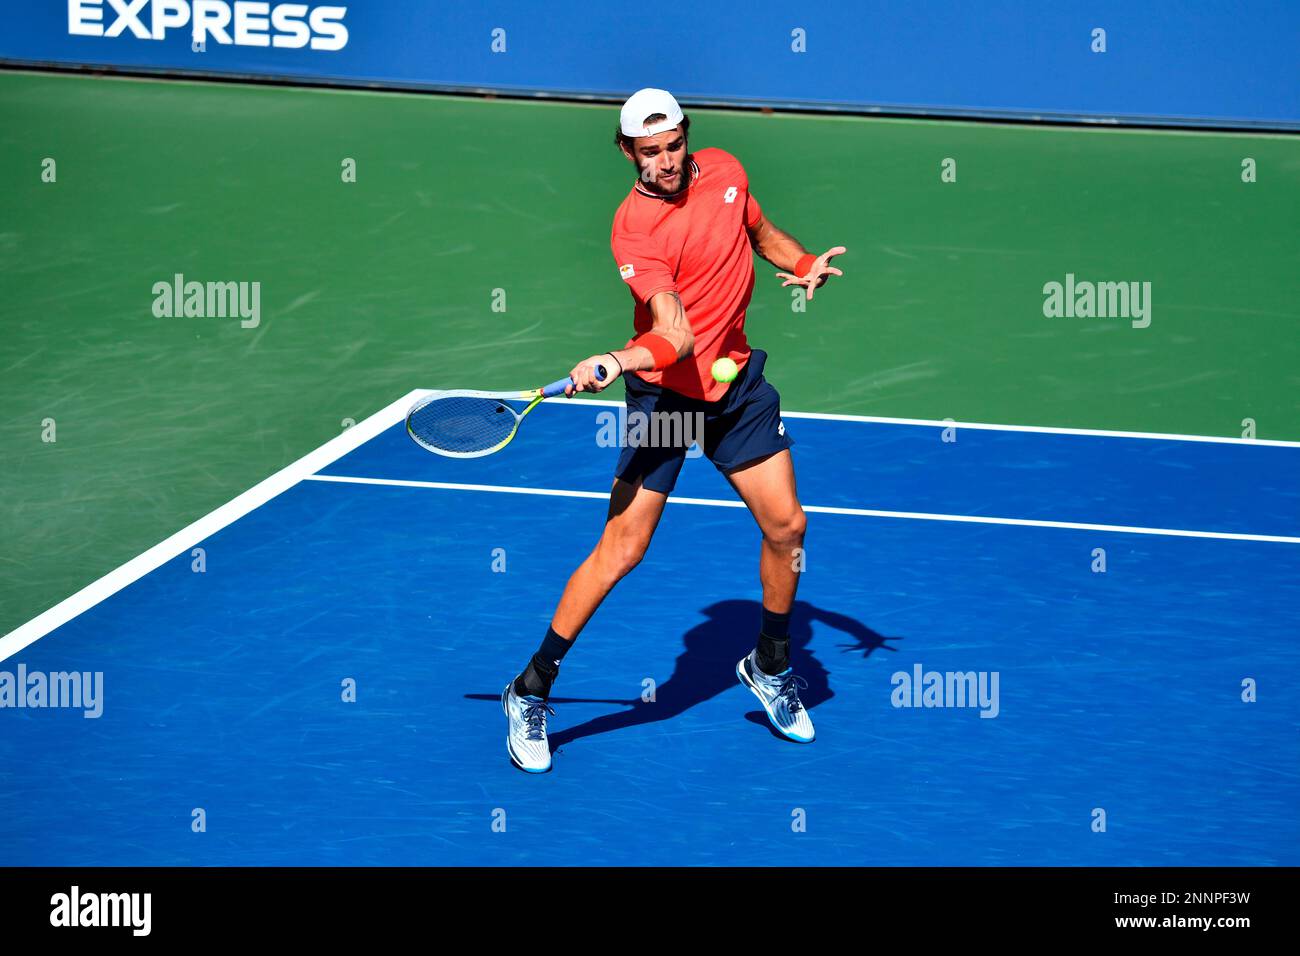 Matteo Berrettini in action against Casper Ruud during a mens singles match at the 2020 US Open, Saturday, Sept